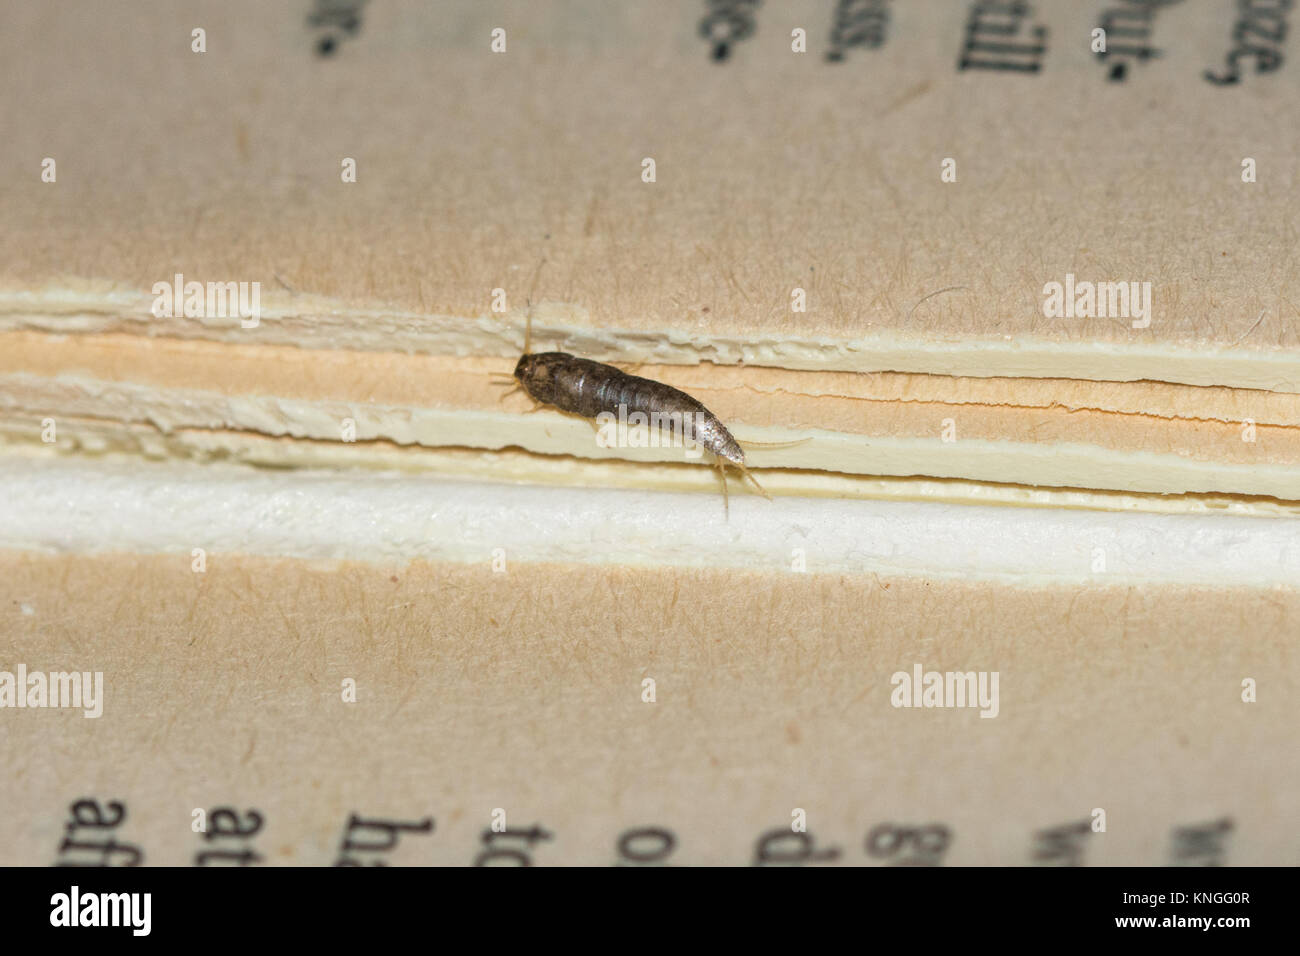 Common silverfish (Lepisma saccharina) insect, sometimes considered a household pest, on an old book Stock Photo